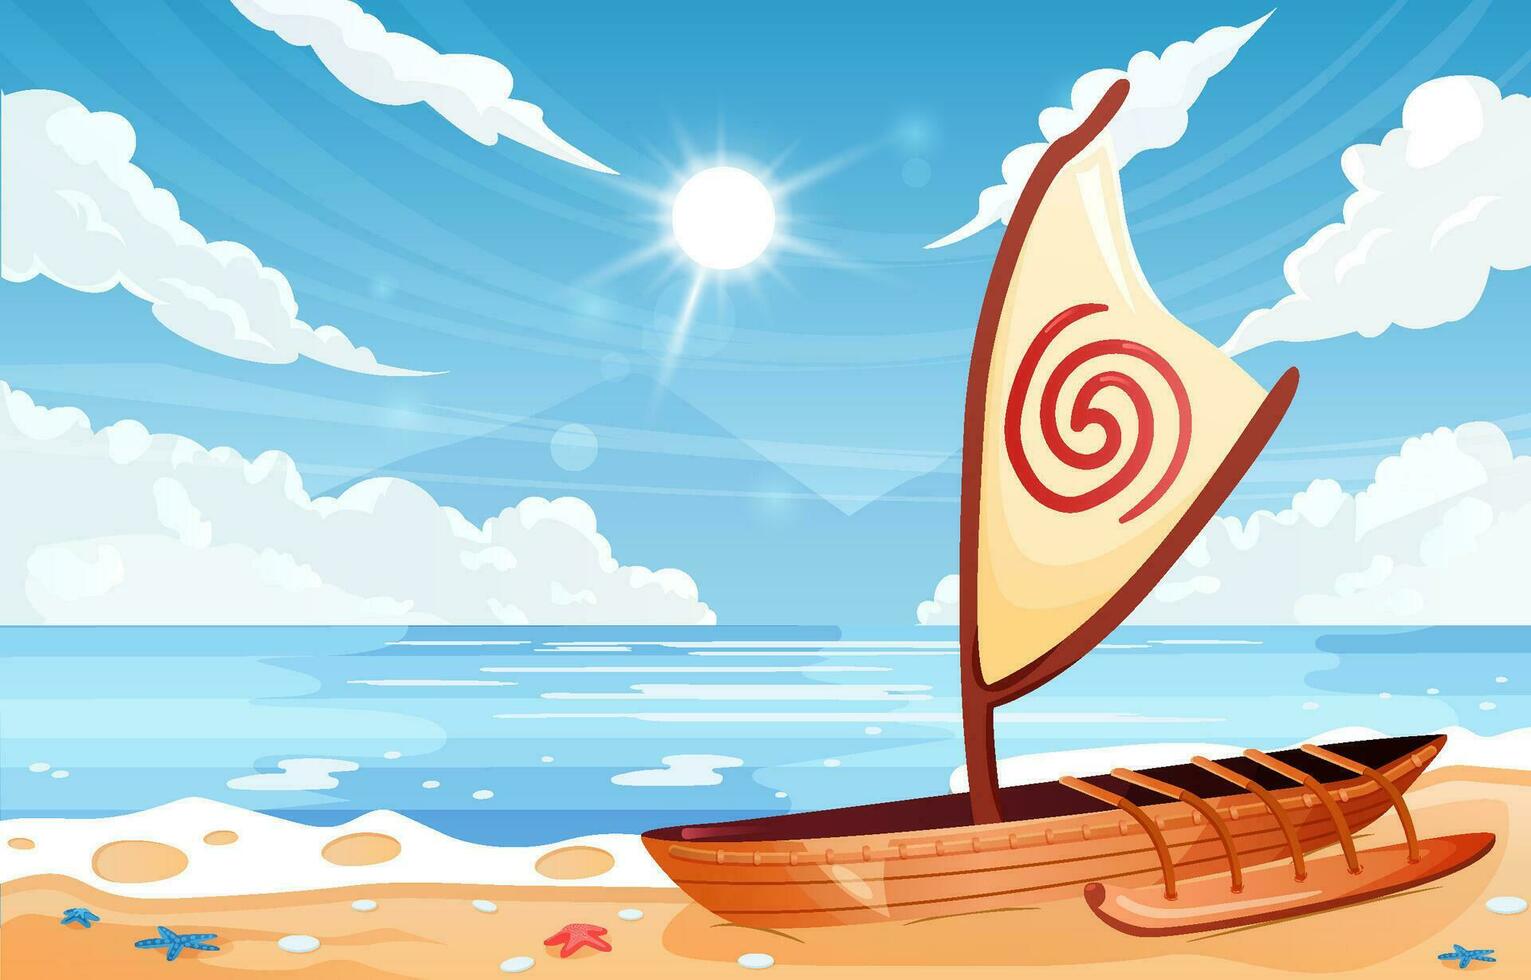 Wooden Boat on The Coast Background vector